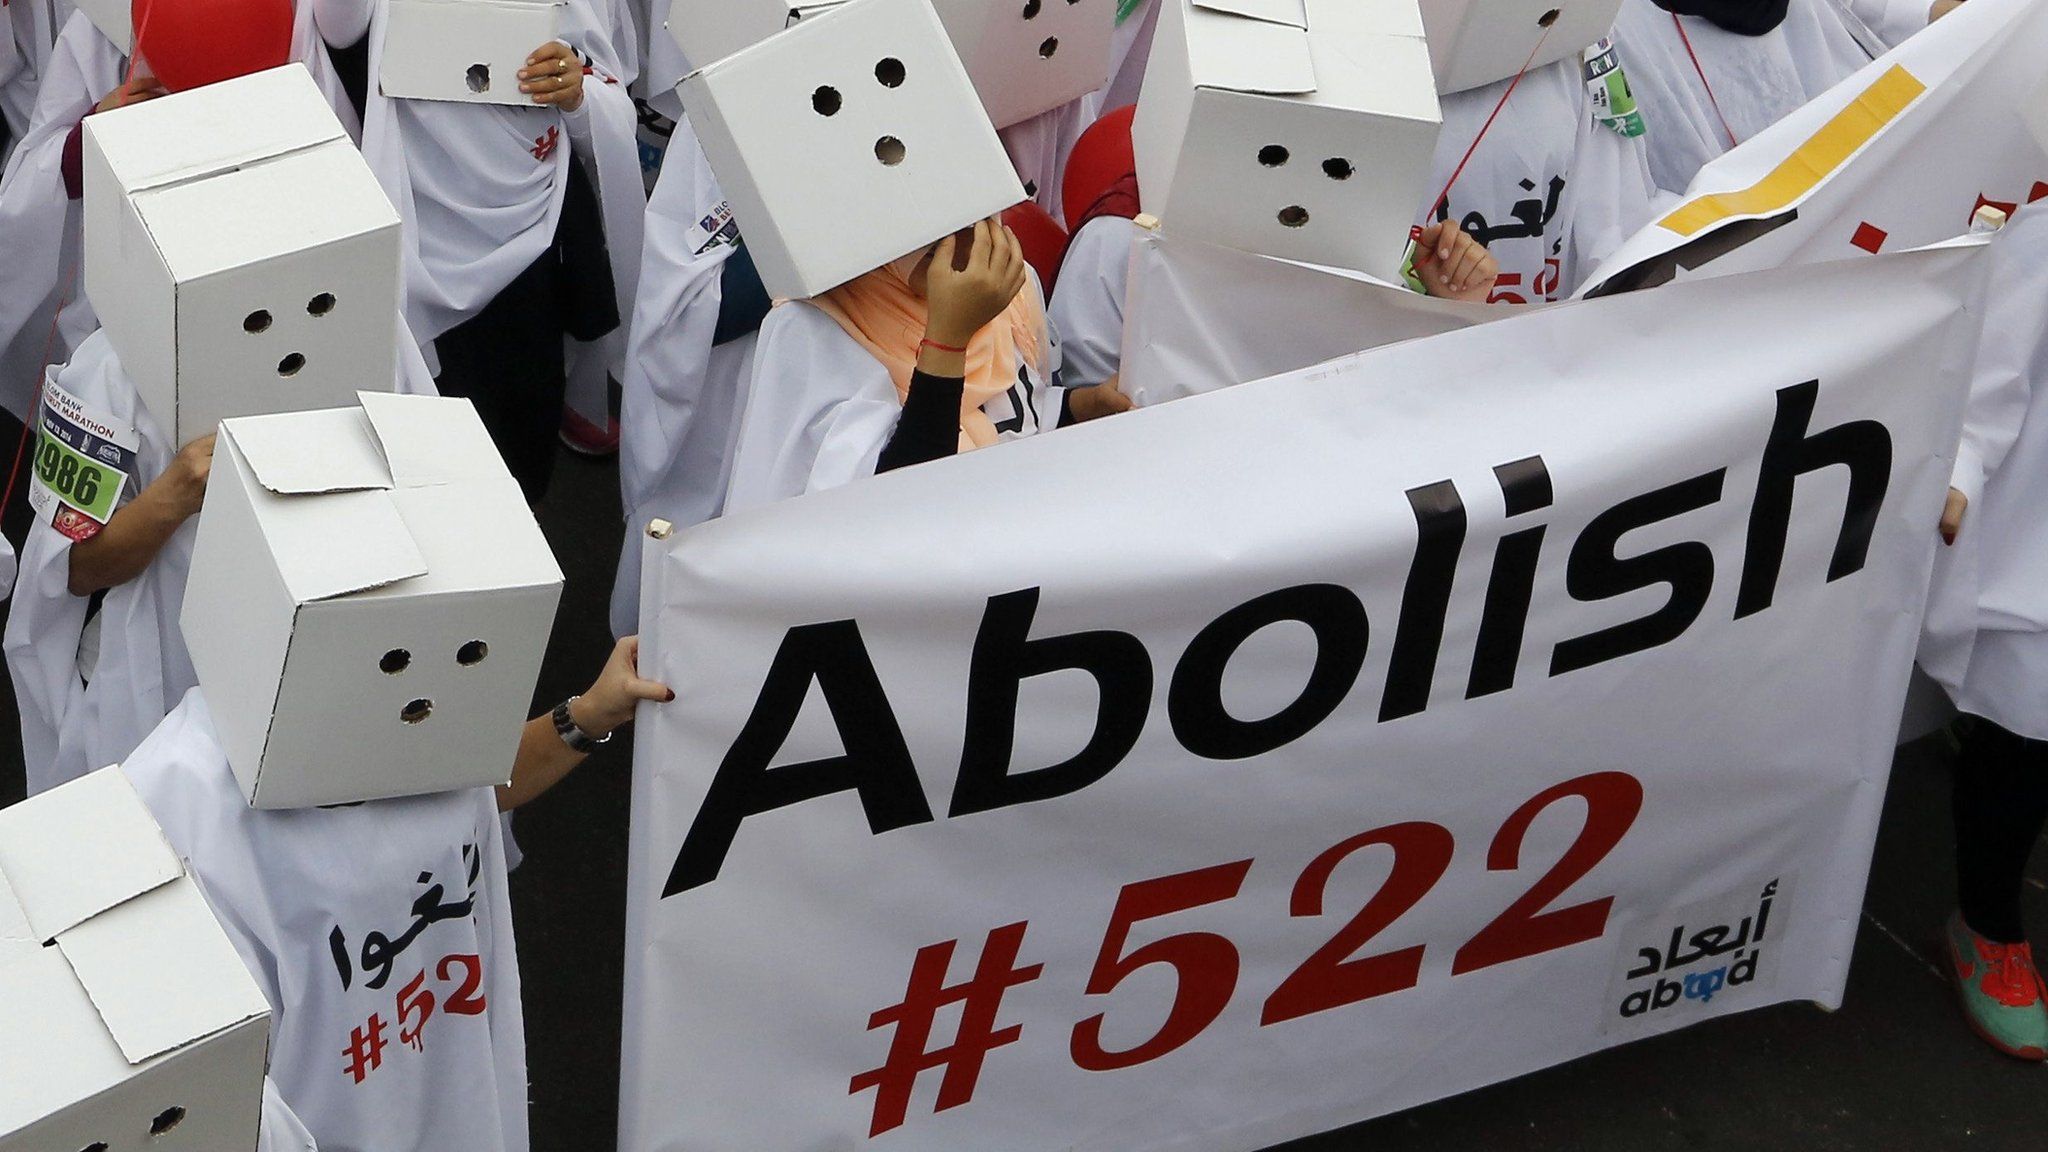 Protesters demanding the abolishment of article 522 of Lebanon's penal code take part in the 14th annual Beirut Marathon on 13 November 2016